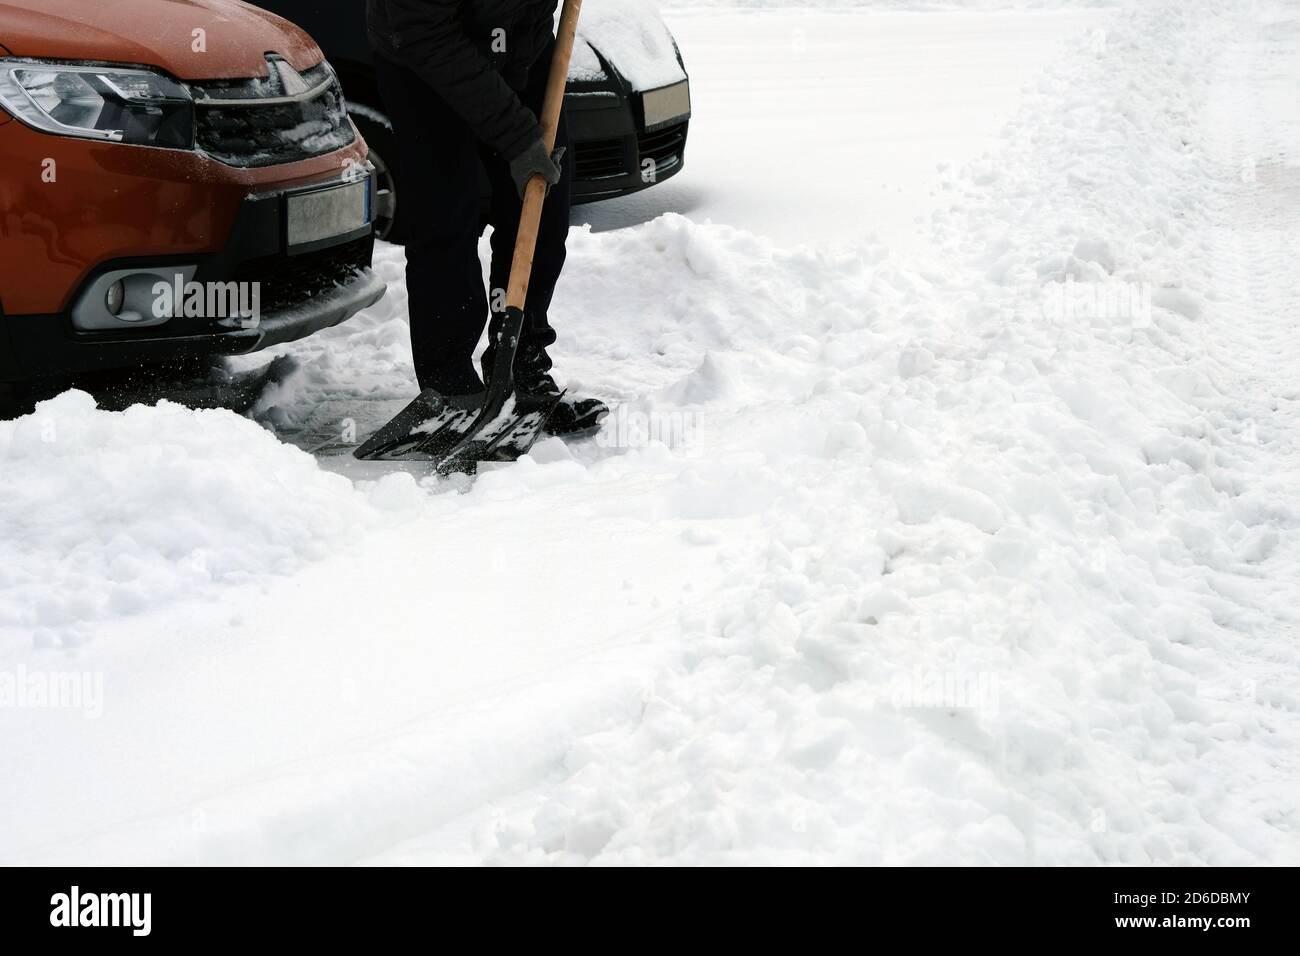 Shovel in hand. Man with shovel clears snow around car in parking lot in winter after snowfall. Winter problems of car drivers. Stock Photo